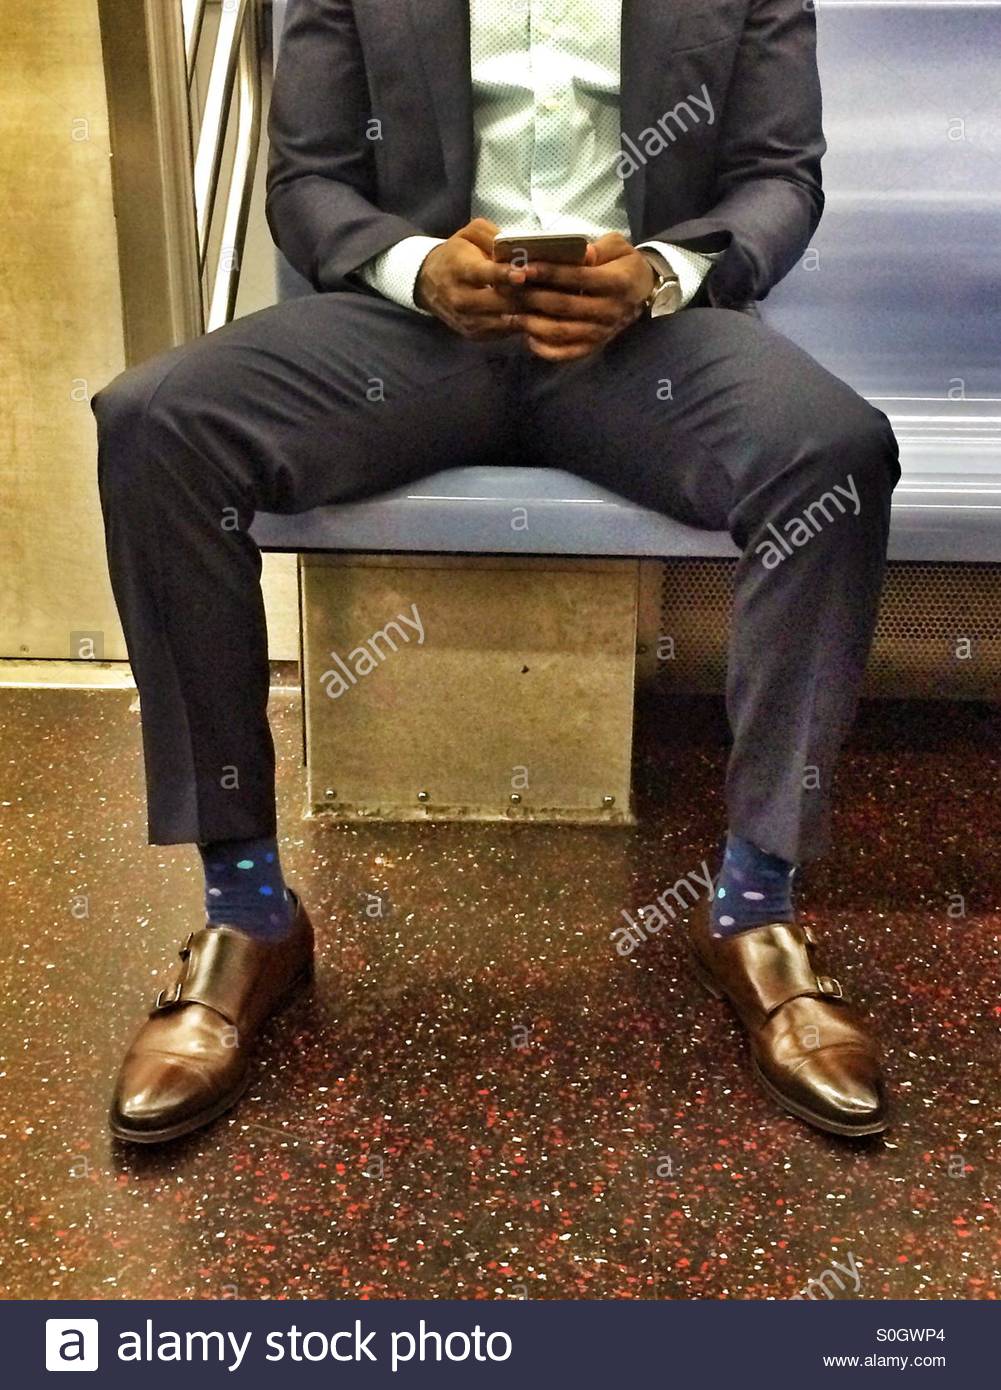 stylish-man-sitting-on-the-subway-with-a